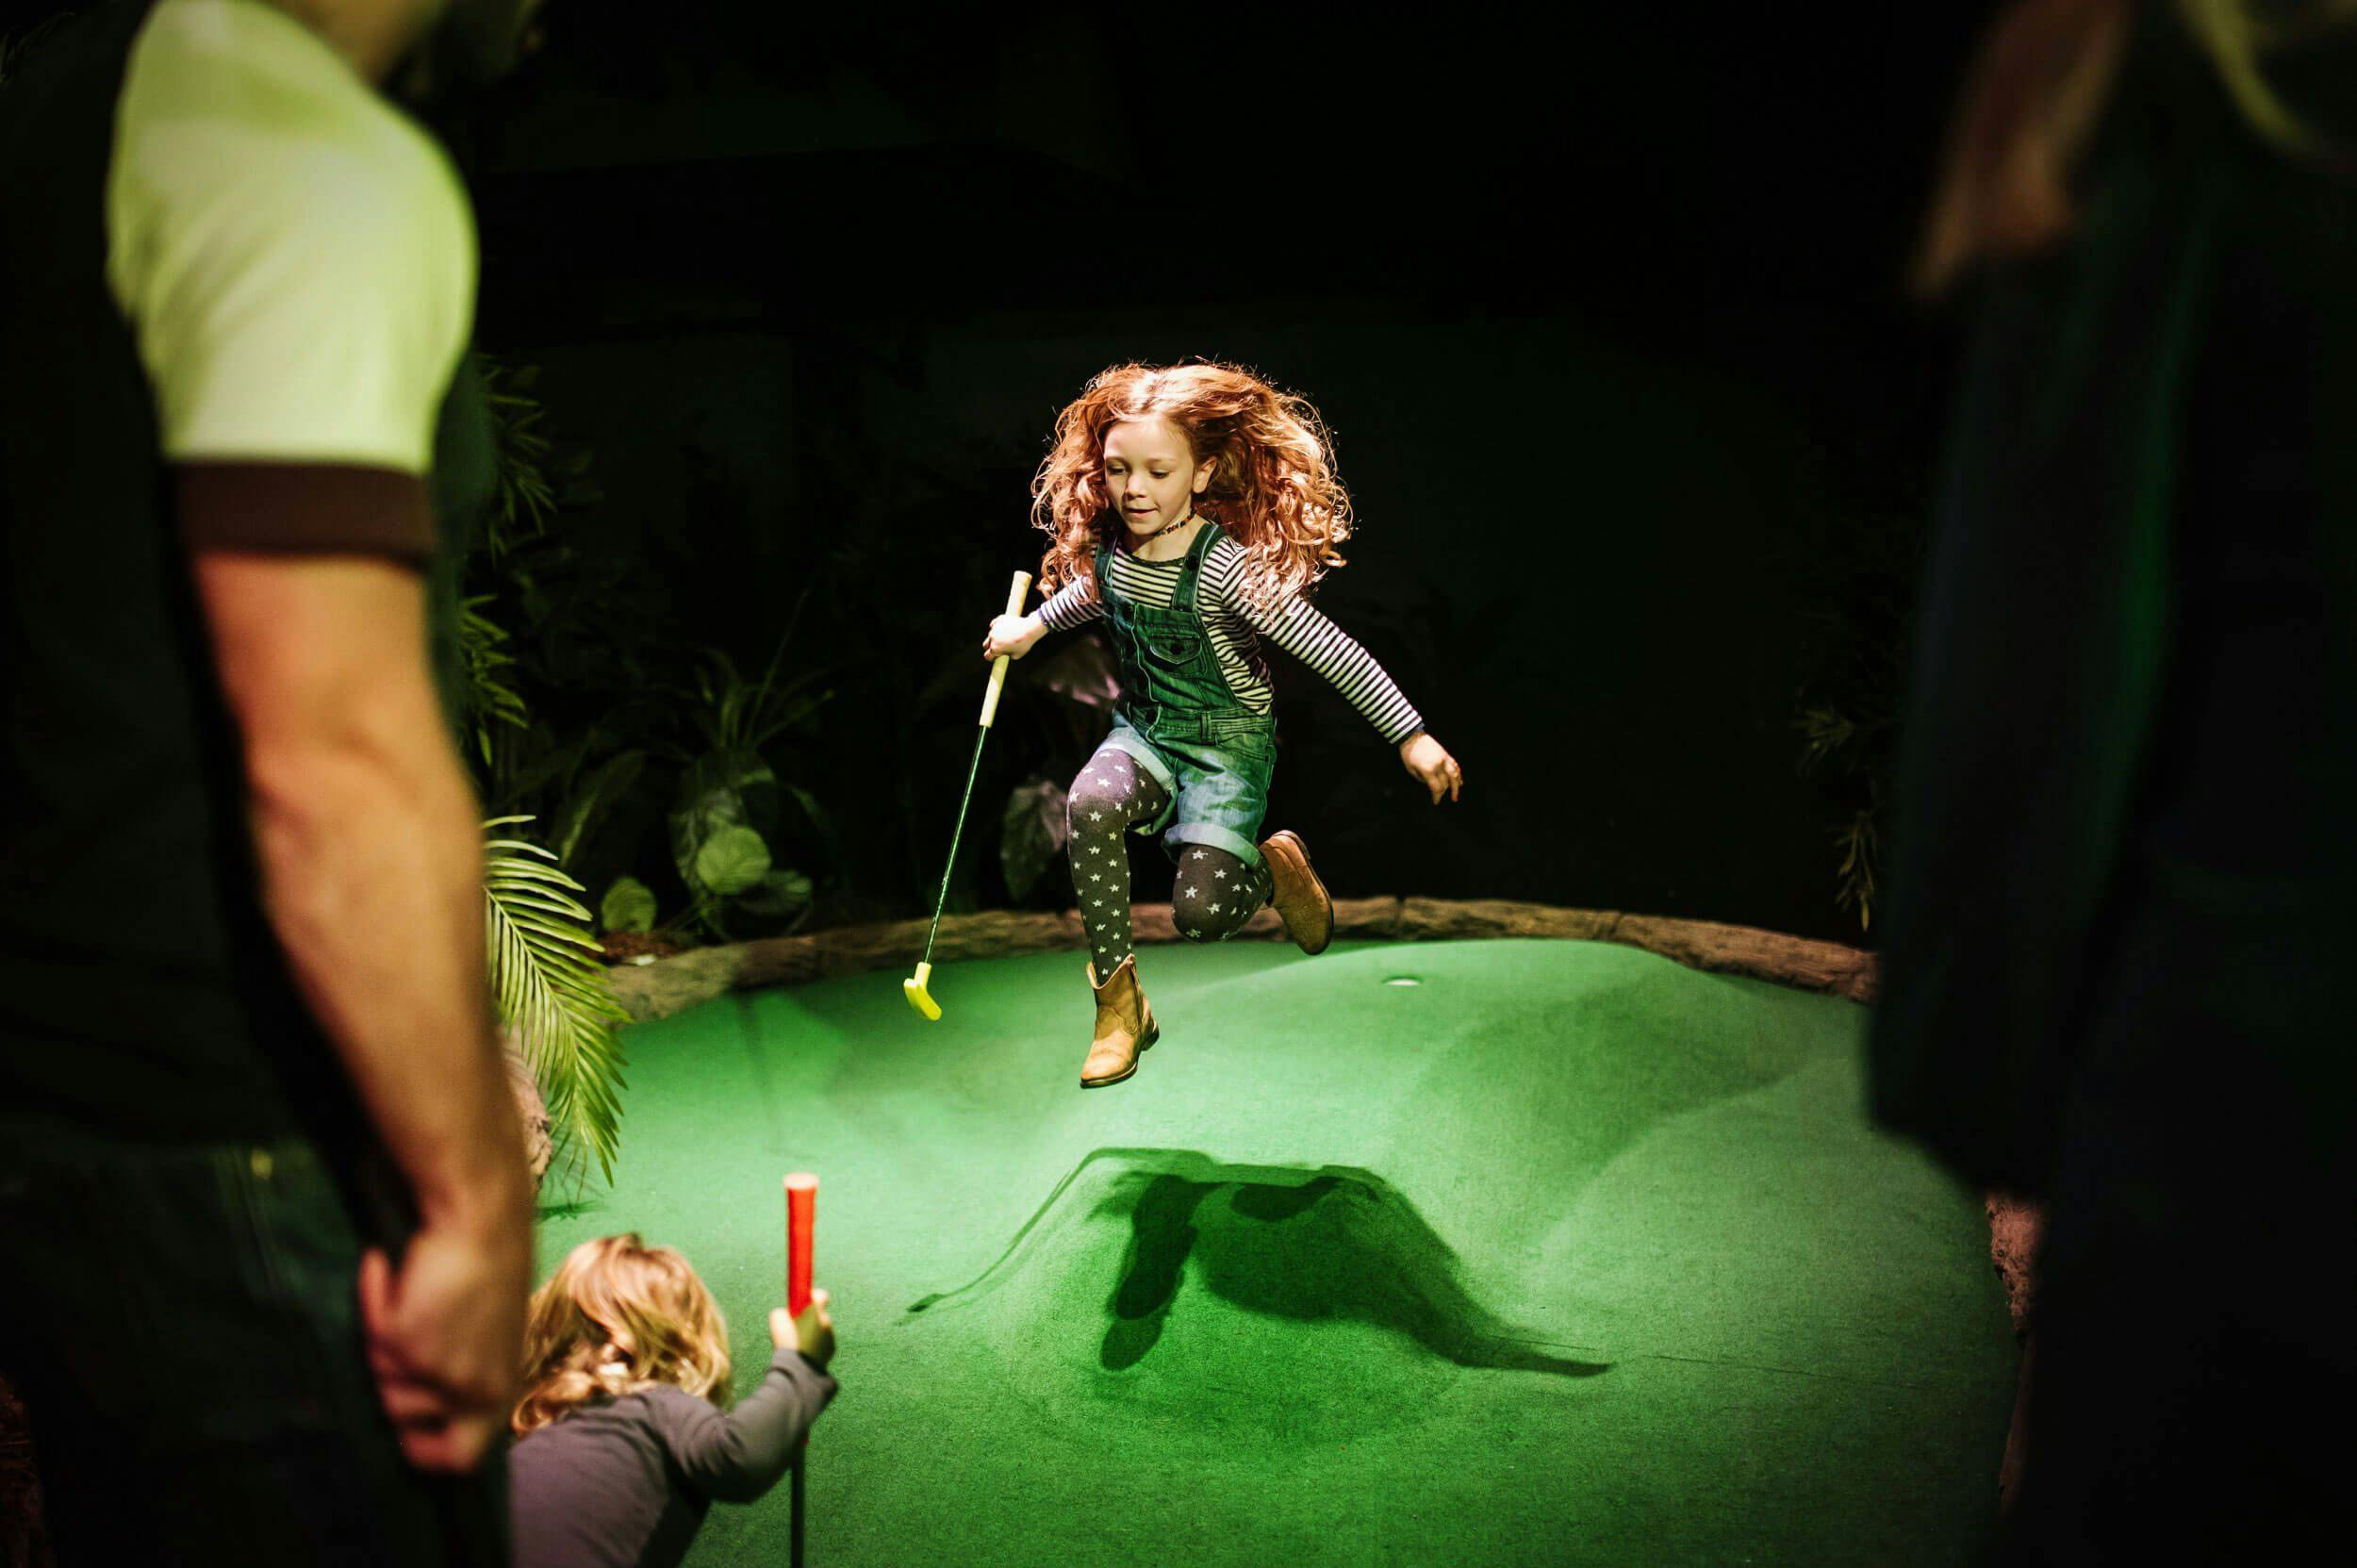 Young girl jumping over a mini golf green hurdle, with a club in one hand and her hair flying. 